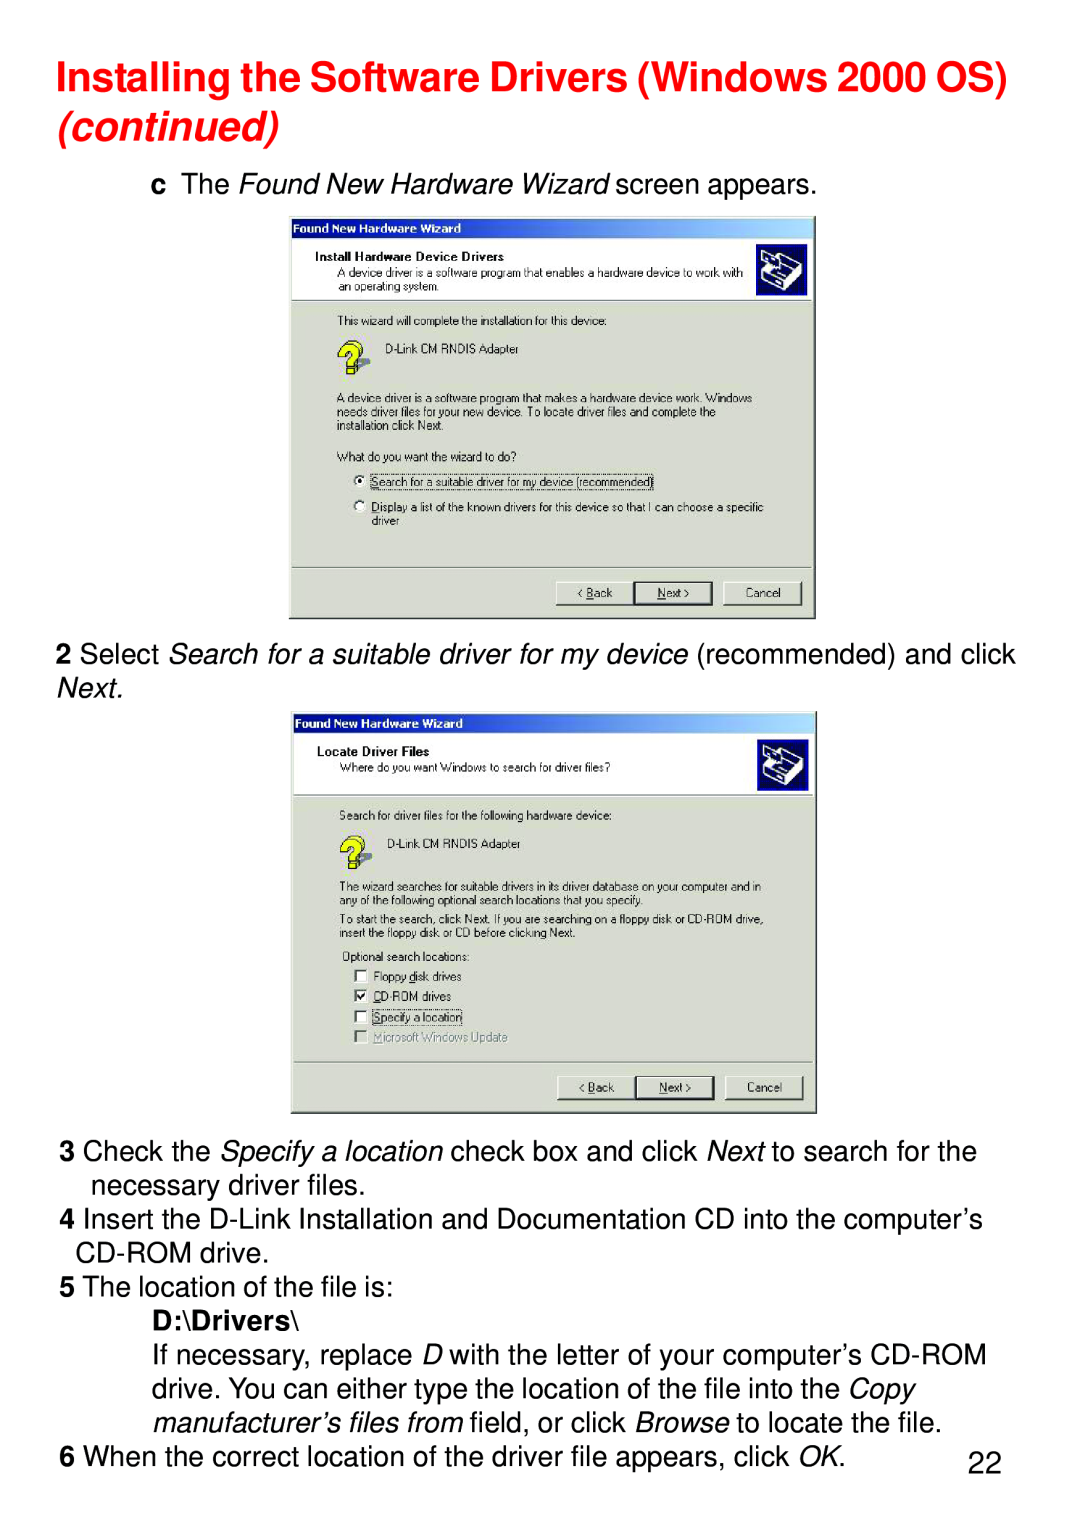 D-Link DCM-202 Installing the Software Drivers Windows 2000 OS continued, c The Found New Hardware Wizard screen appears 